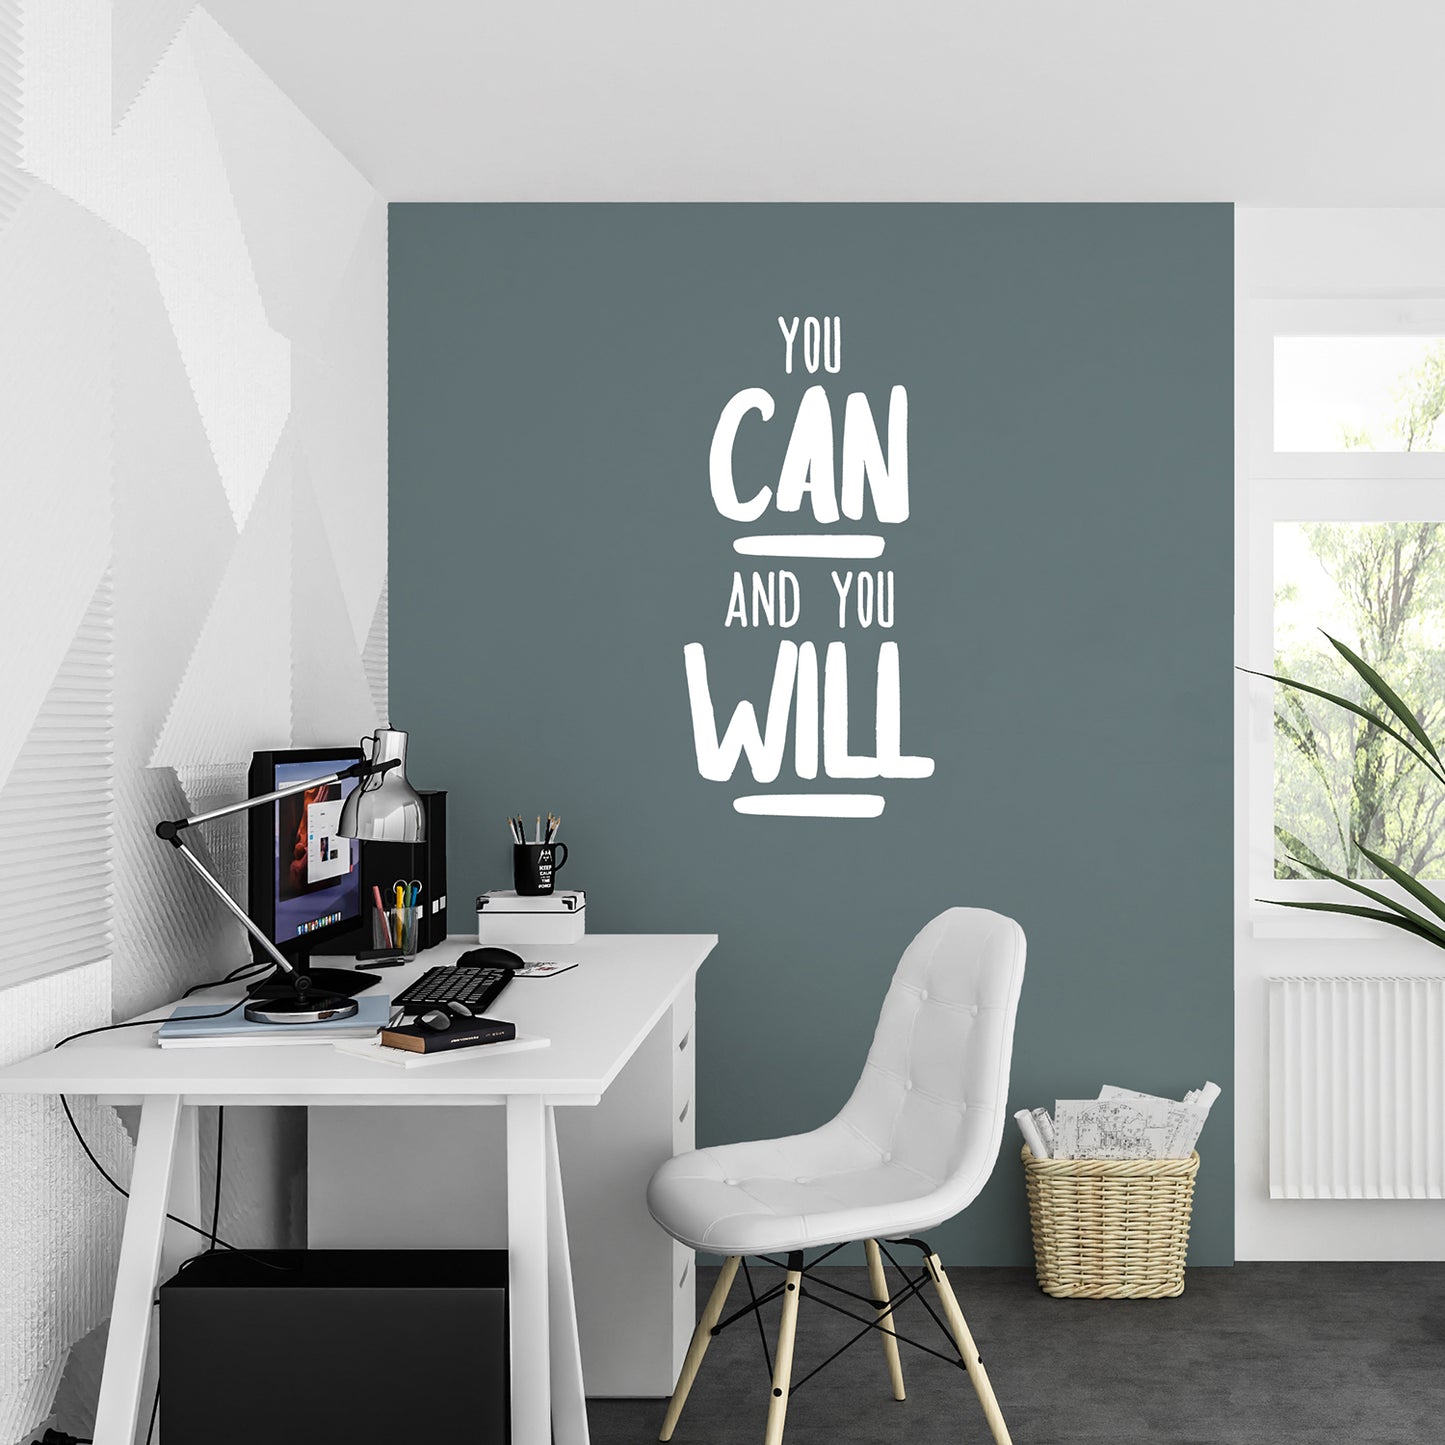 You can and you will | Wall quote-Wall quote-Adnil Creations